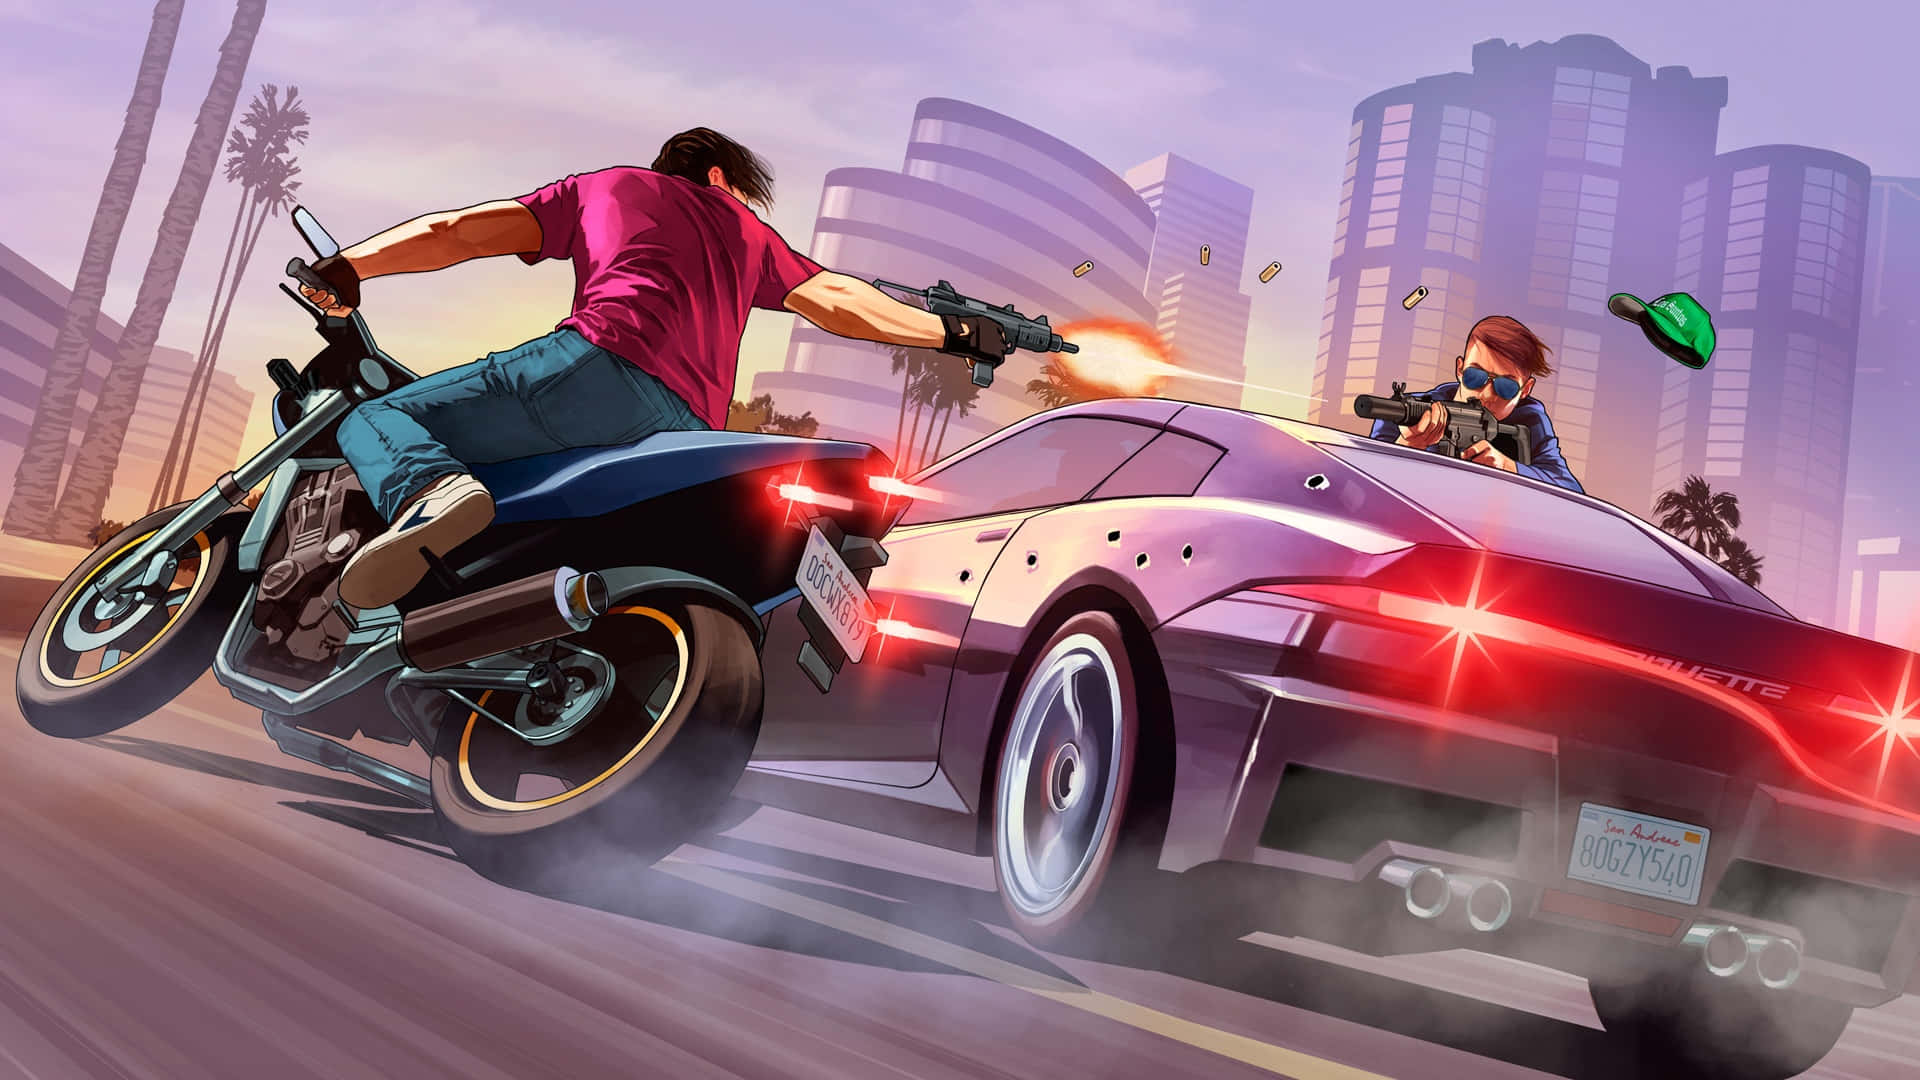 Automatic Car And Motorbike Drivers Gunfight Wallpaper